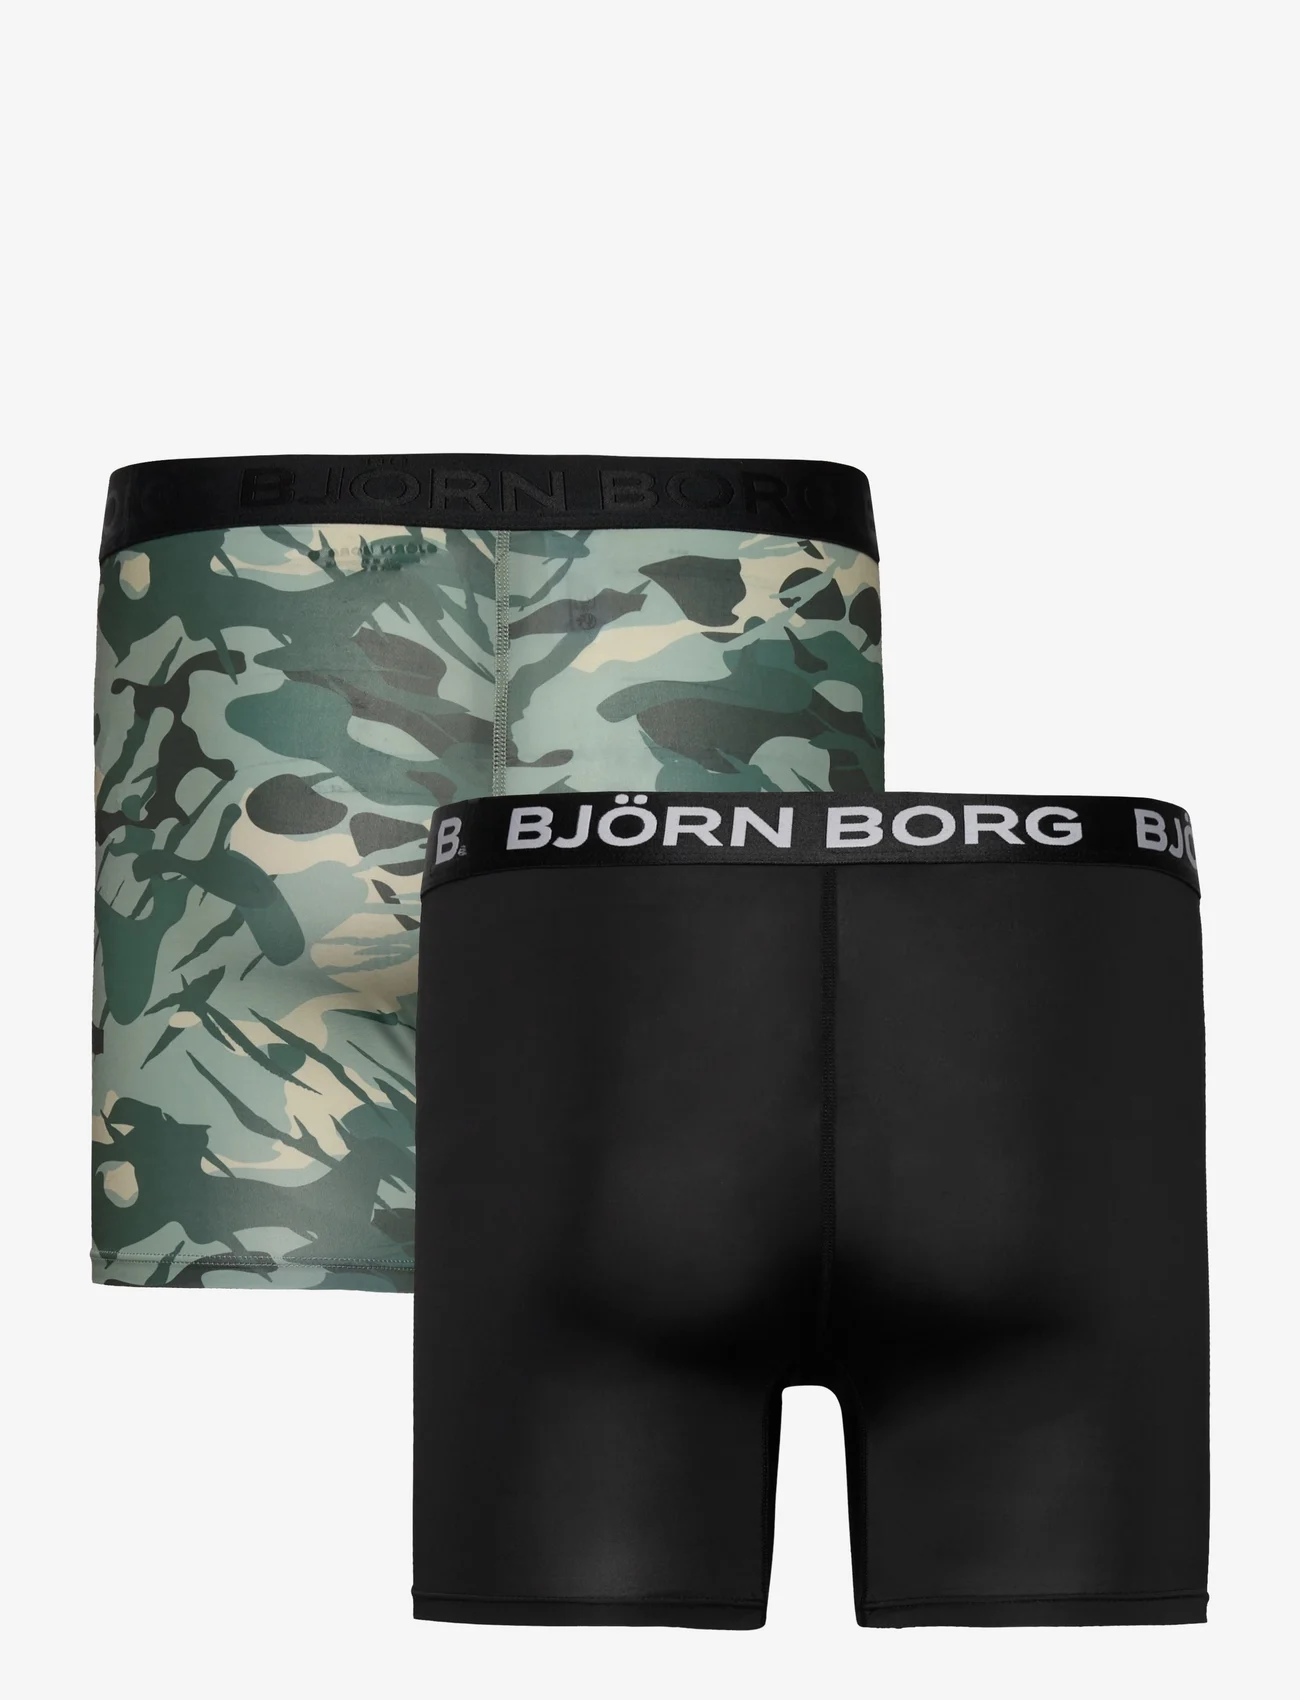 Björn Borg - PERFORMANCE BOXER 2p - lowest prices - multipack 1 - 1